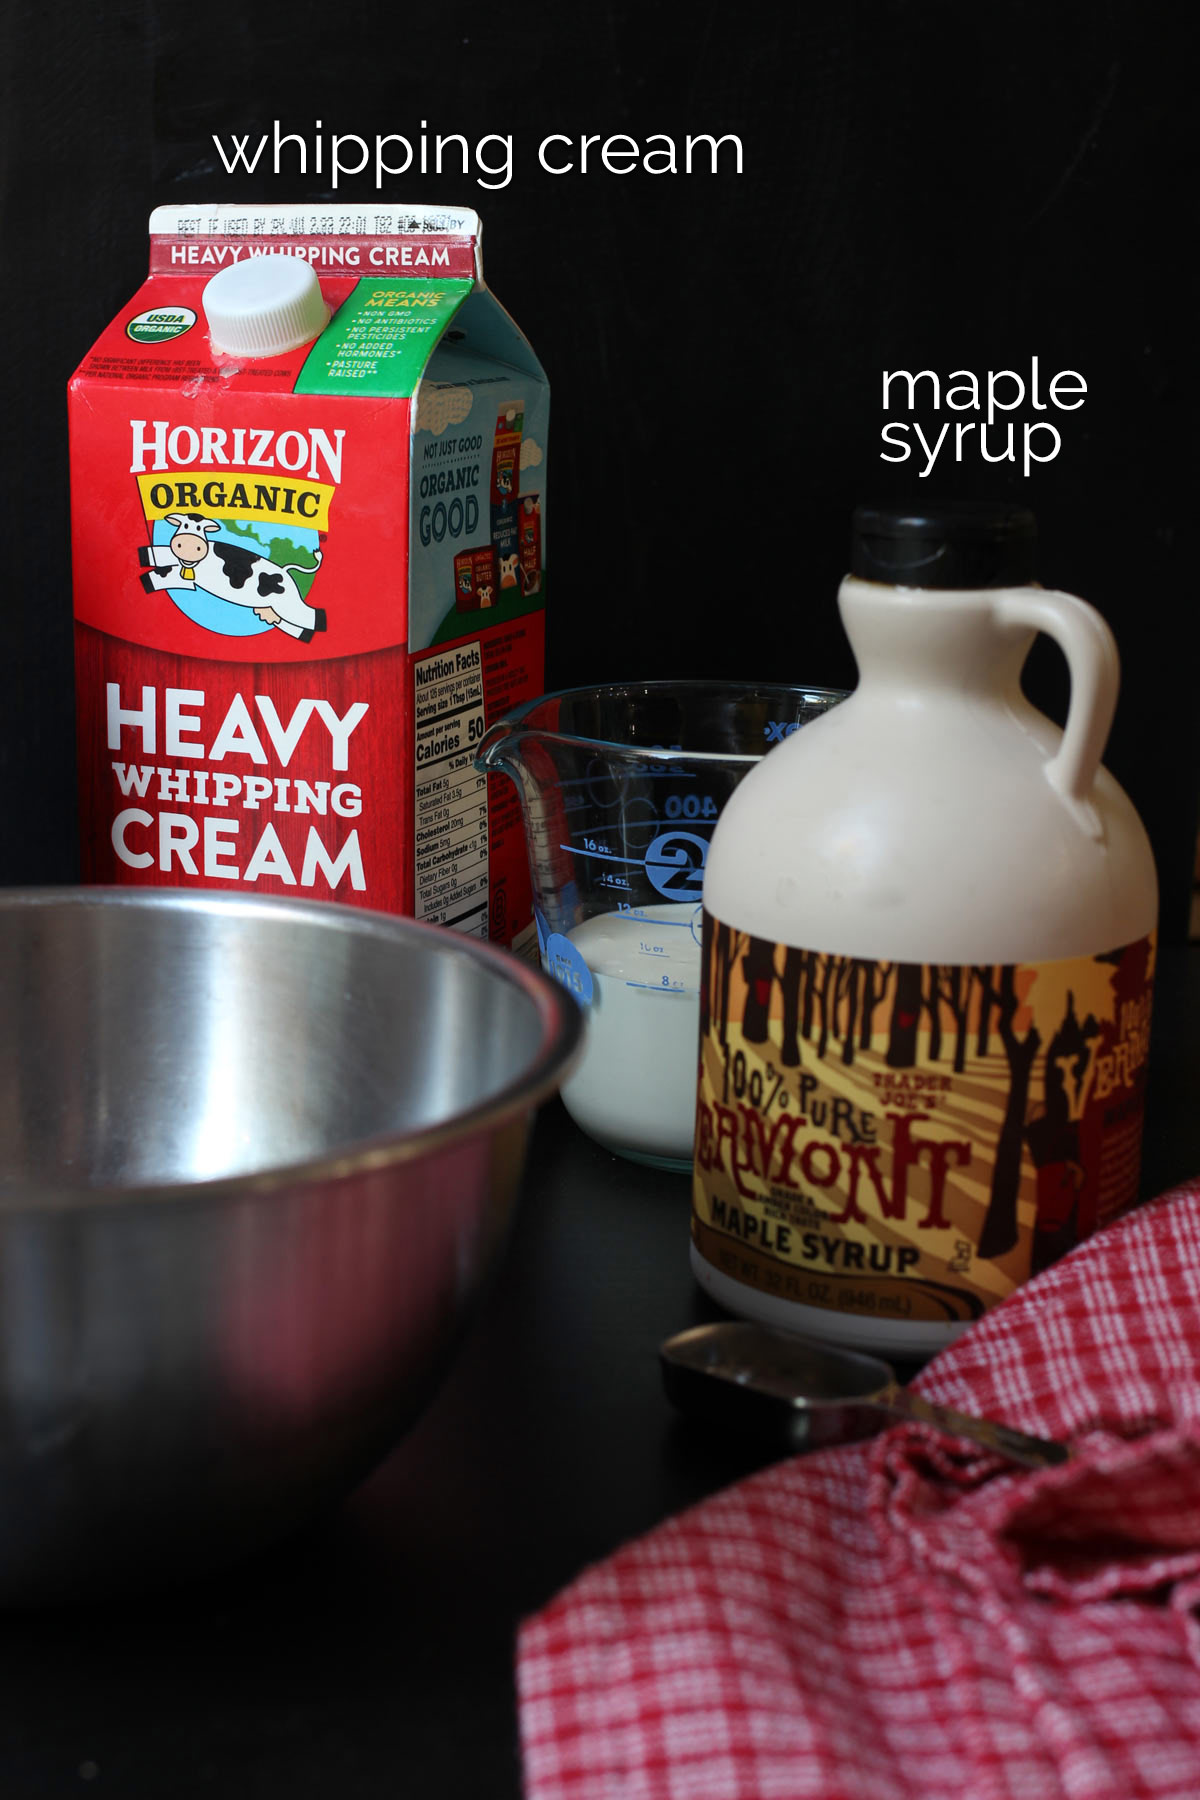 carton of whipped cream near a bottle of maple syrup on black table with bowl and measure and red cloth.